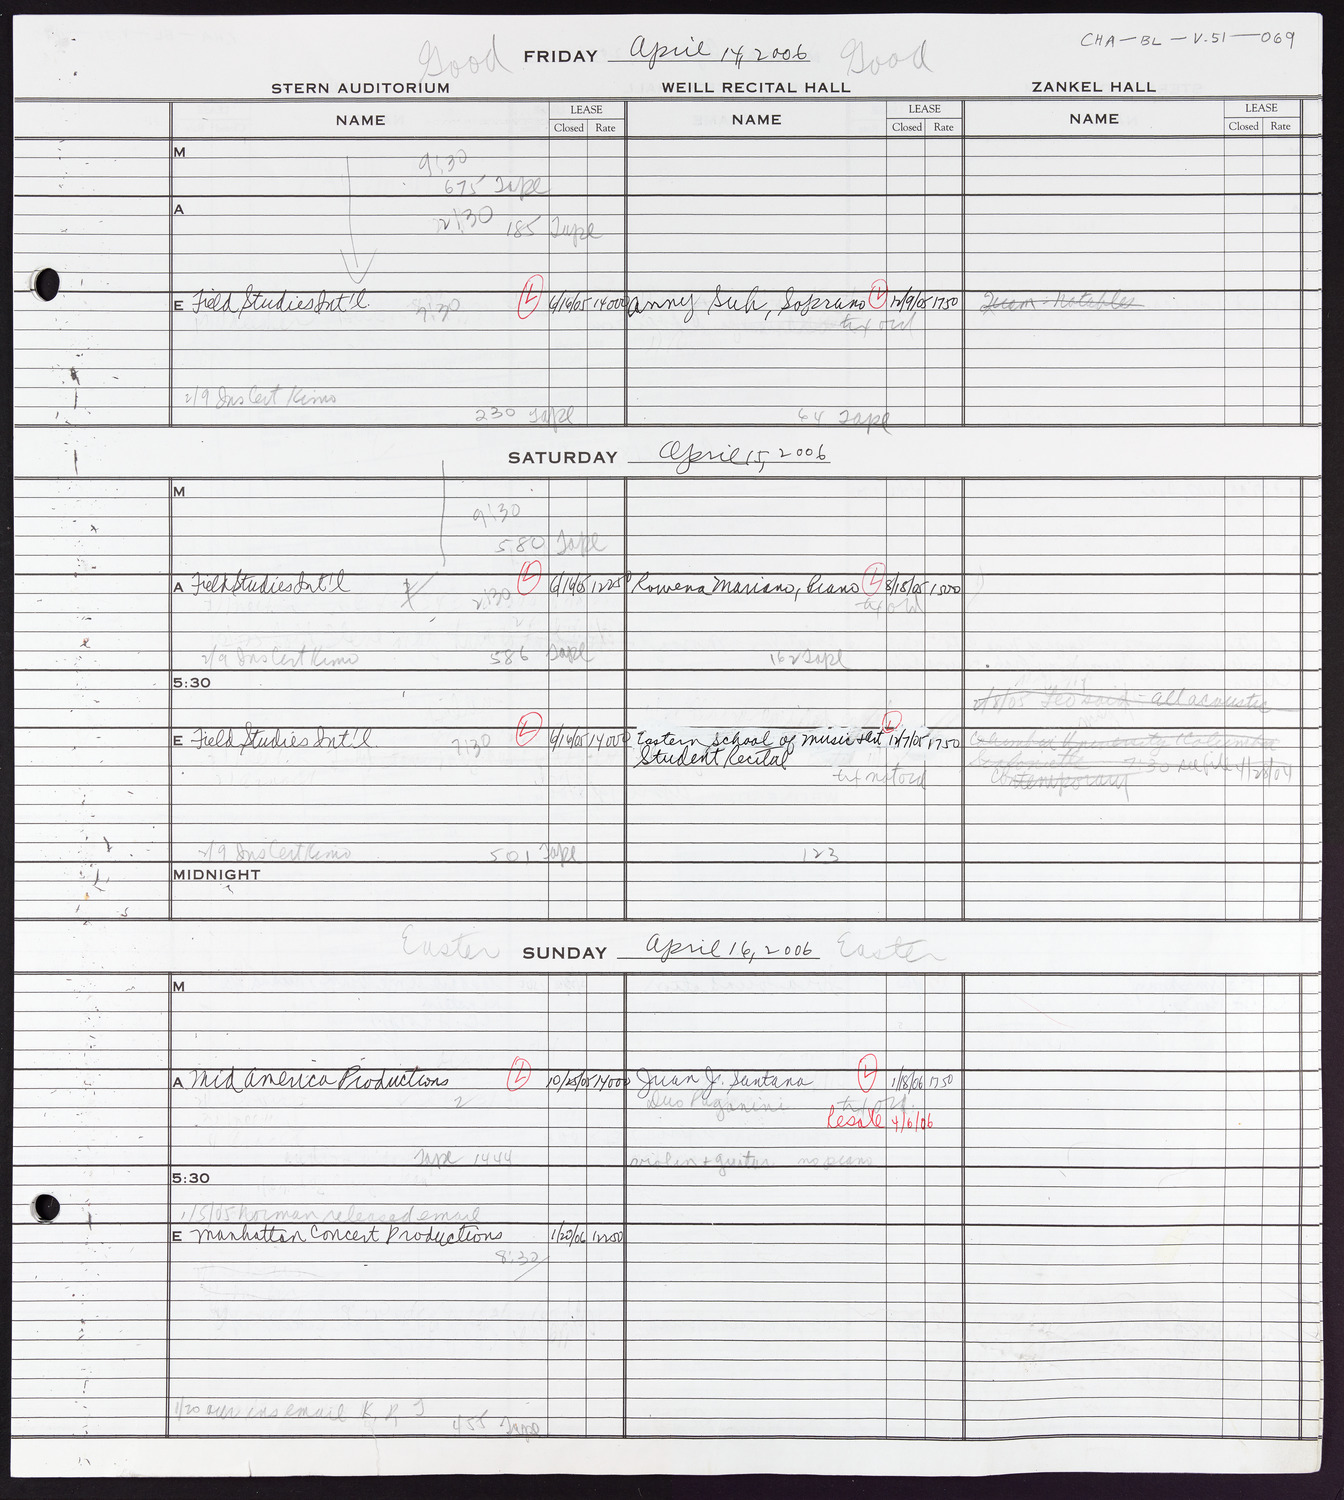 Carnegie Hall Booking Ledger, volume 51, page 69